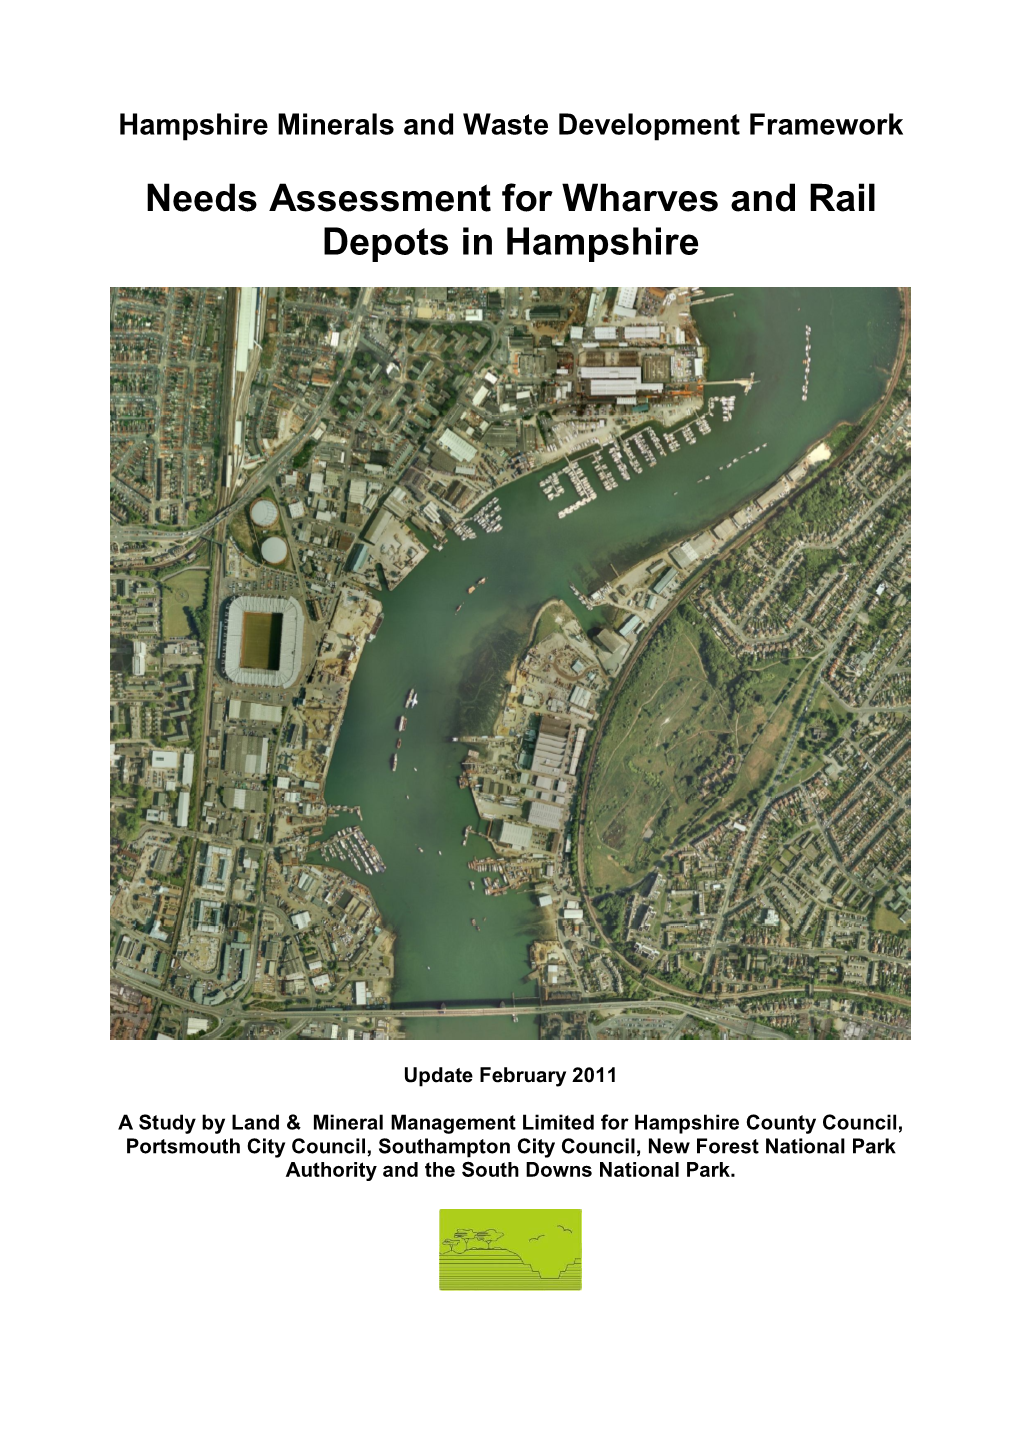 Needs Assessment for Wharves and Rail Depots in Hampshire